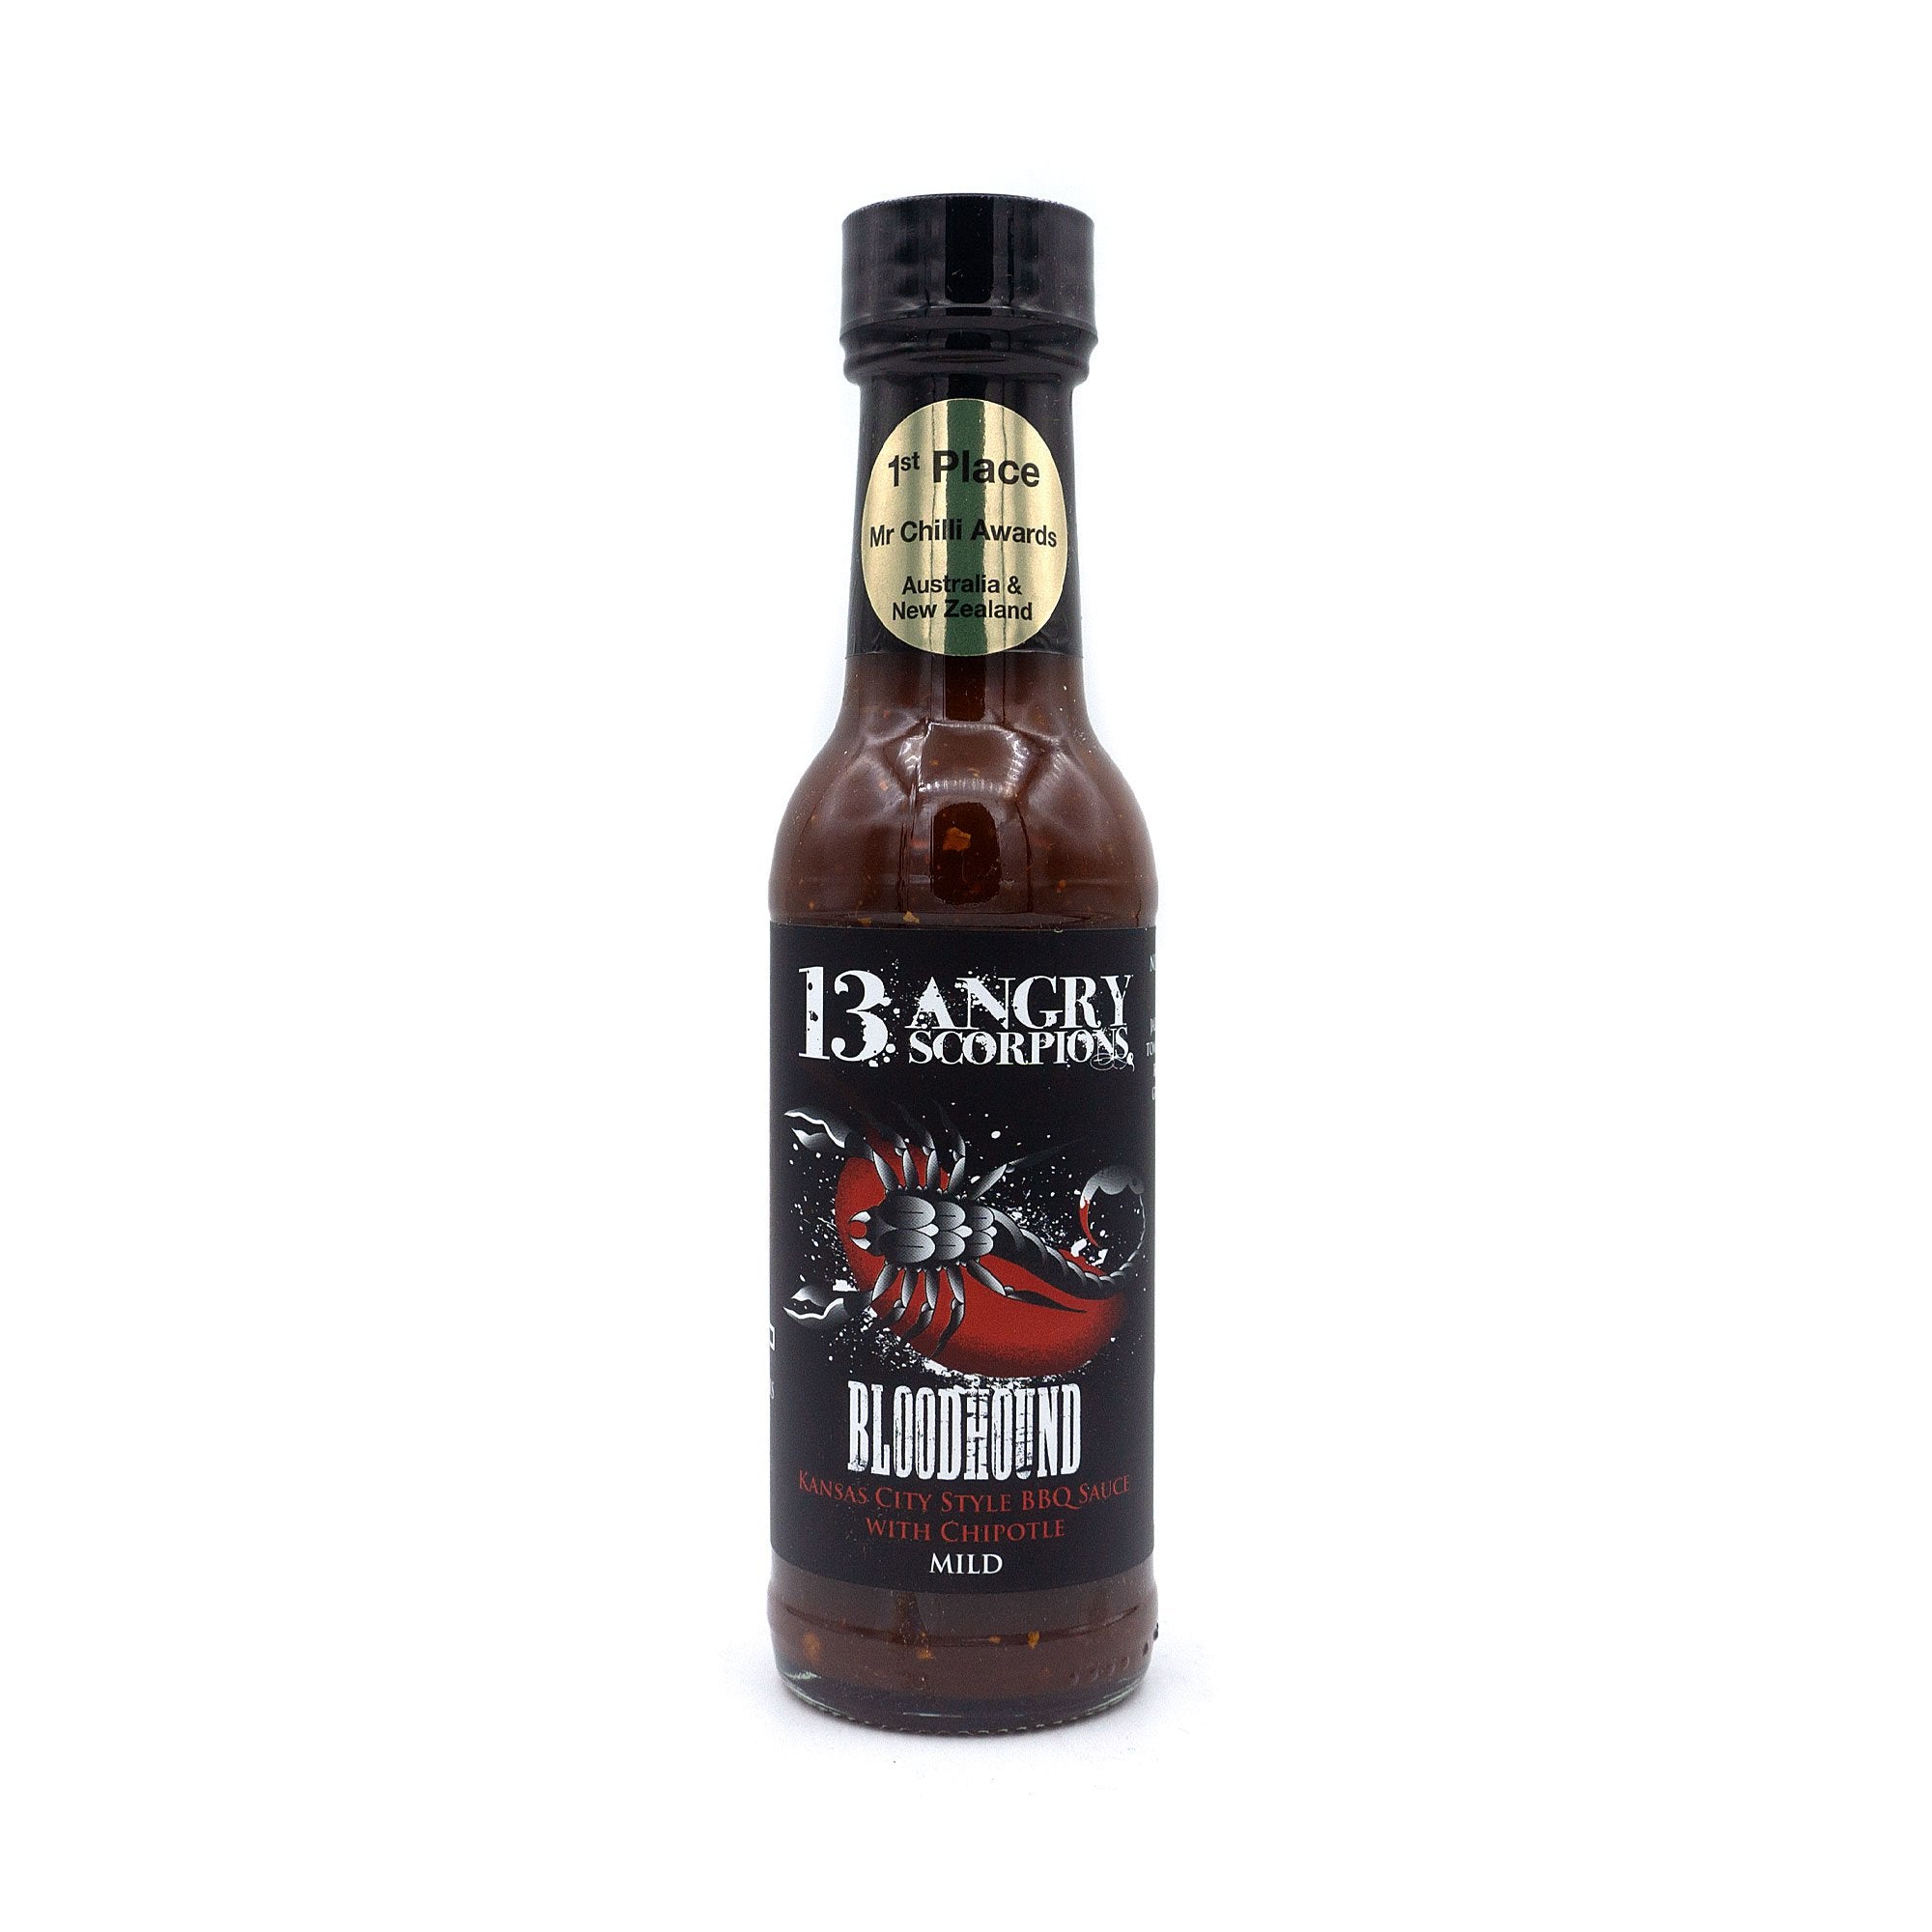 Hot Sauce - 13 Angry Scorpions - Bloodhound BBQ Sauce